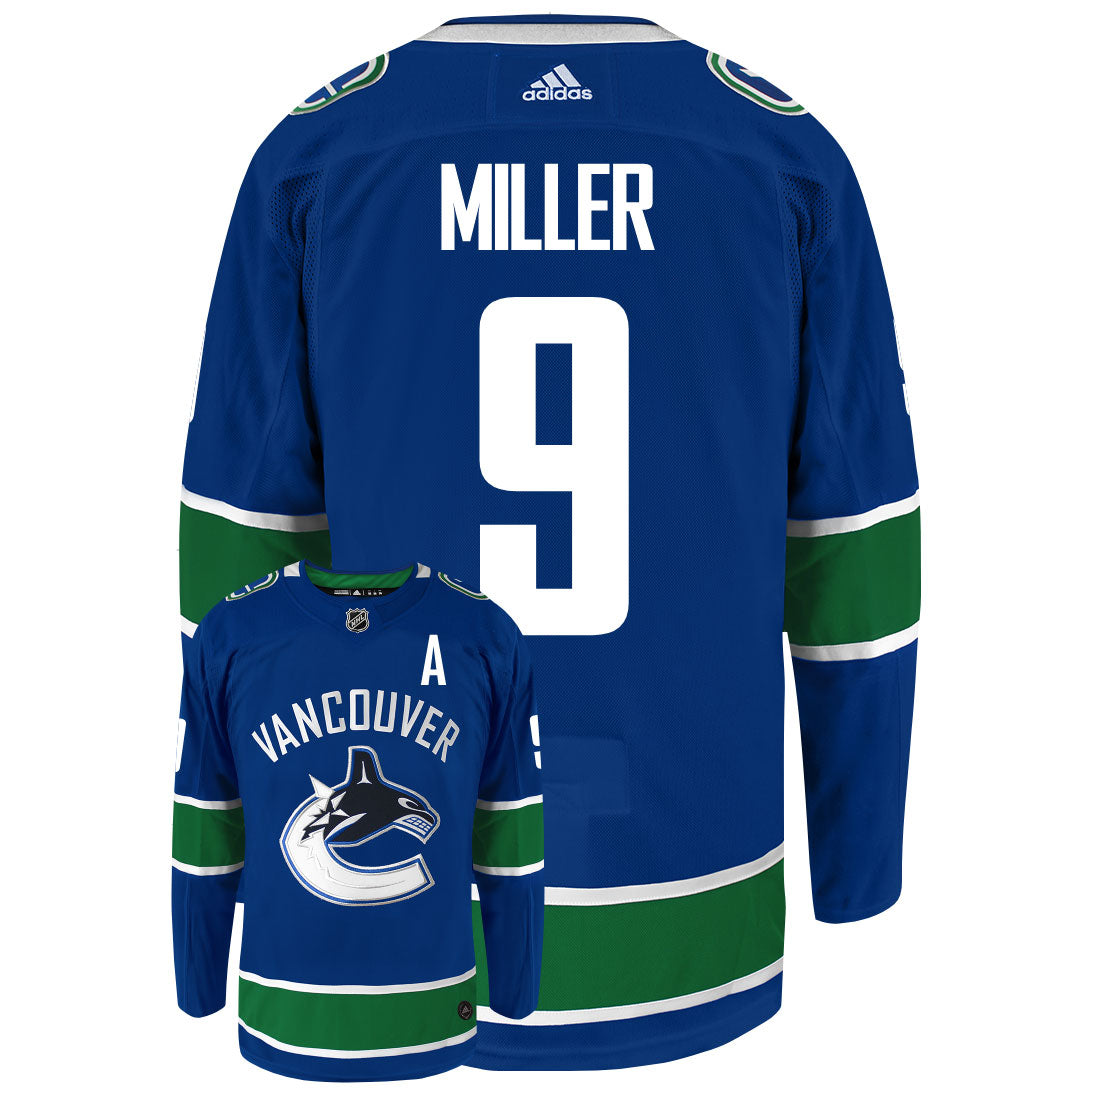 Rookie Designer Attempts a Vancouver Canucks Jersey. Let me know your  thoughts! : r/canucks